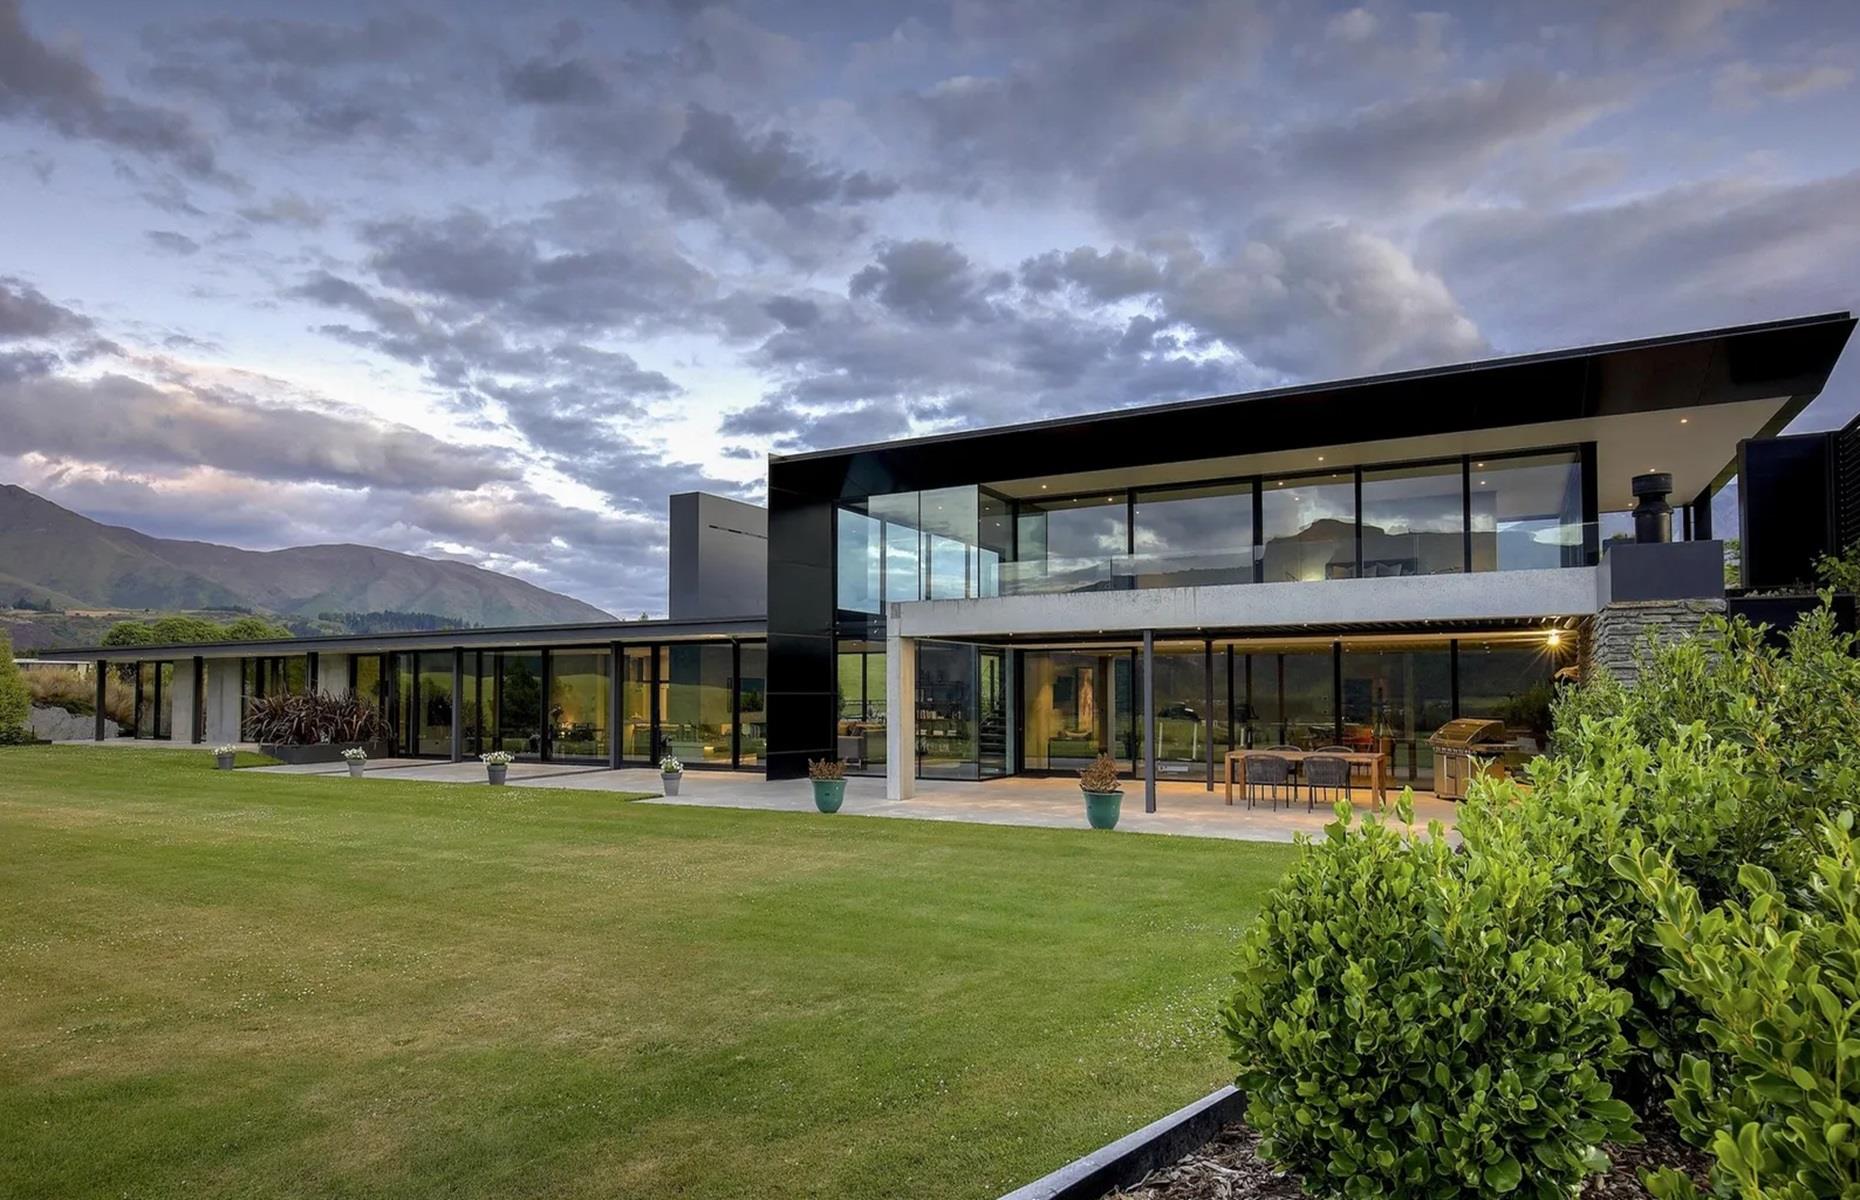 <p>When you live among the remarkable landscapes of Queenstown, New Zealand, then your home needs to be equally spectacular – and this amazing modern home is certainly that. Situated on a private, 10-acre site in sought-after Bendemeer Farm, <a href="https://www.sothebysrealty.com/eng/sales/detail/180-l-2965-3ev45v/2-todd-lane-queenstown-ot">the residence</a> is both at one with its surroundings and an absolute triumph of architectural design. Let's take a closer look...</p>